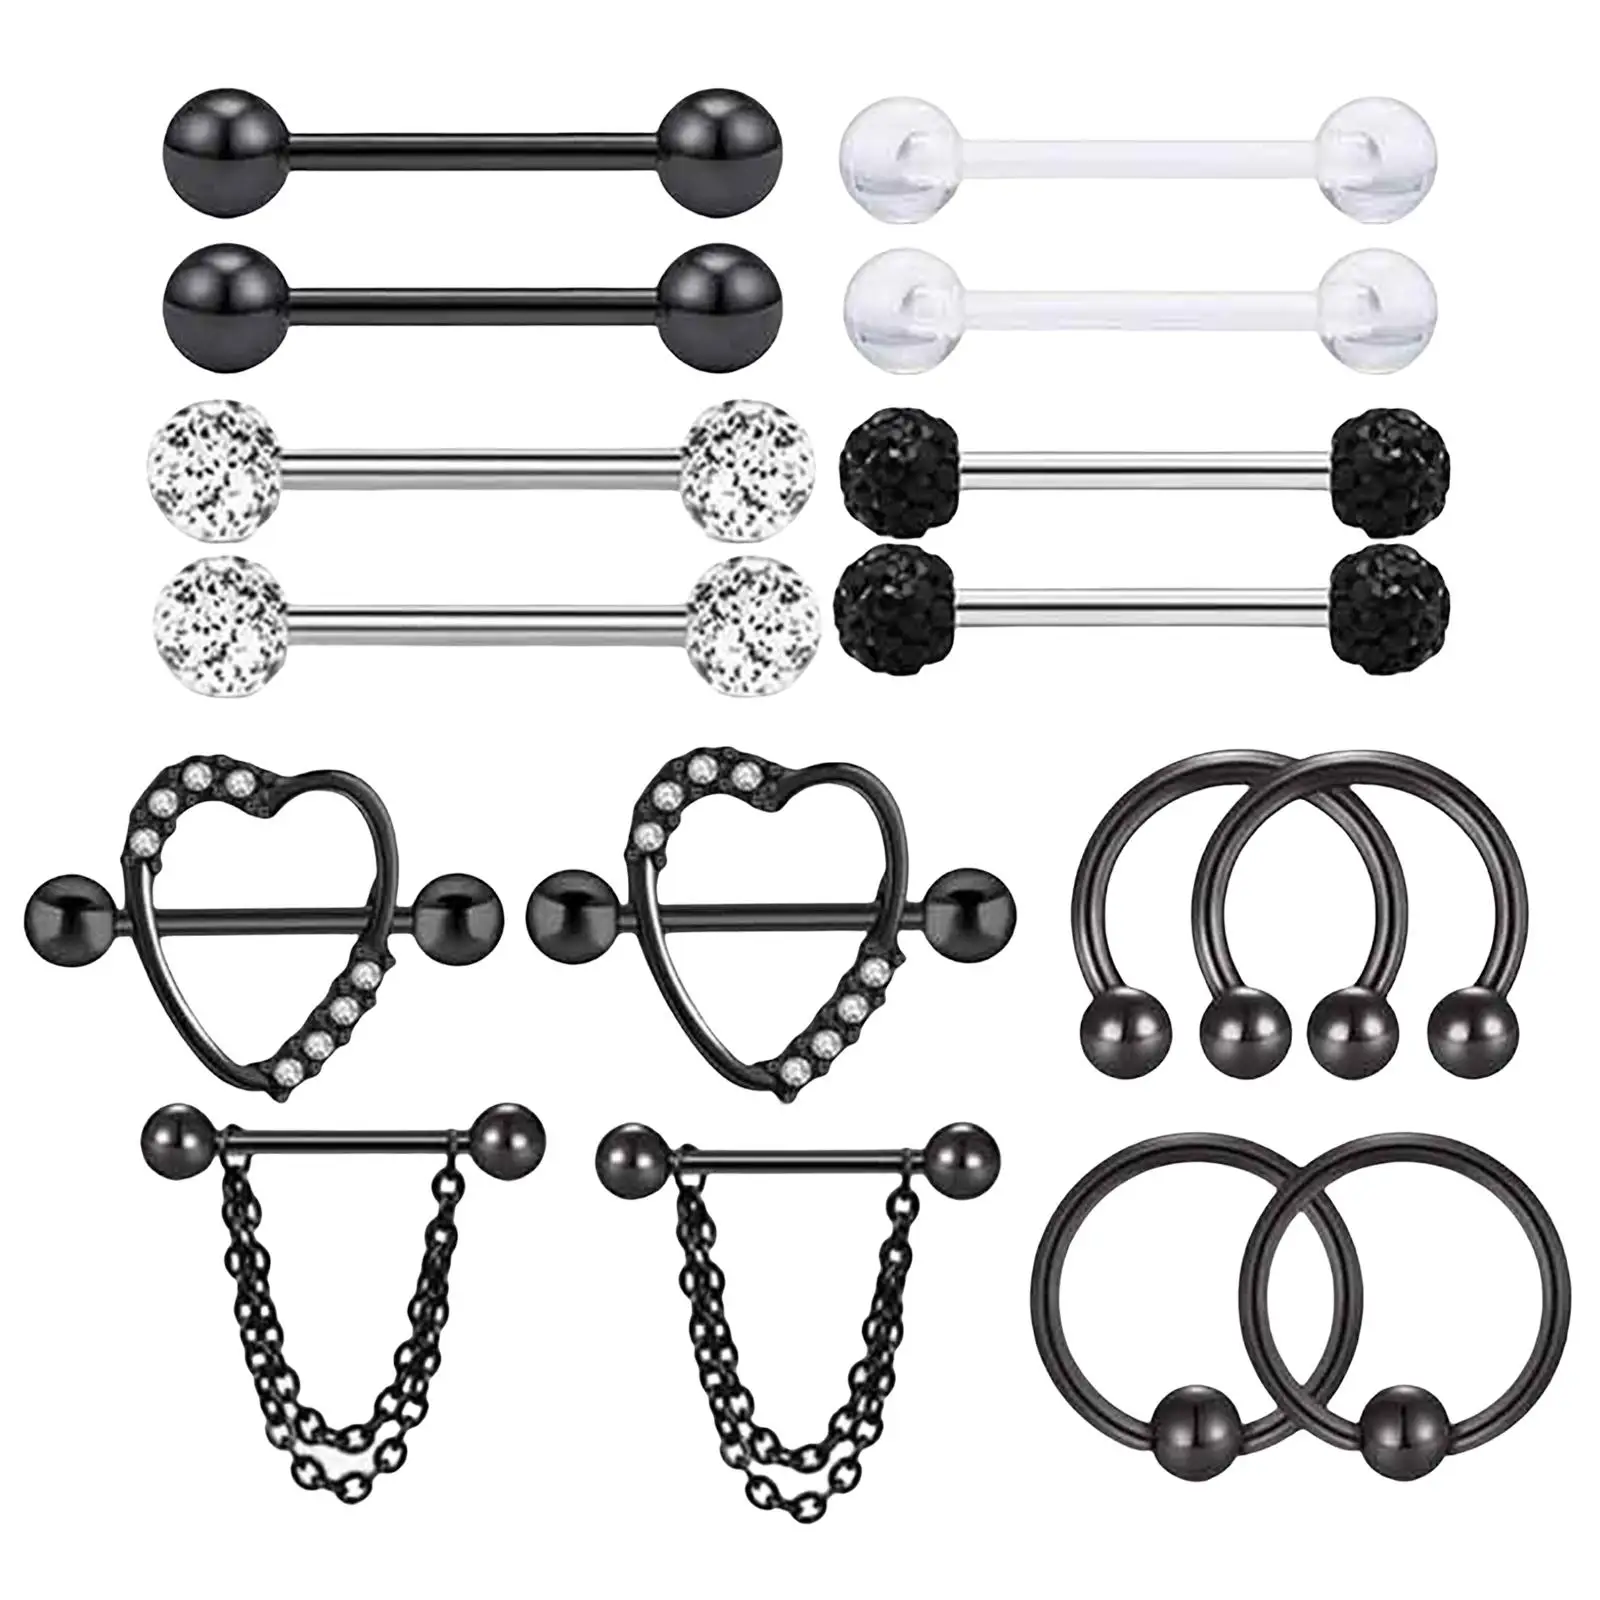 8 Pairs Charming Pierced Body Jewelry Straight Barbell Stainless Steel Studs Rings for Women Teen Girls Premium